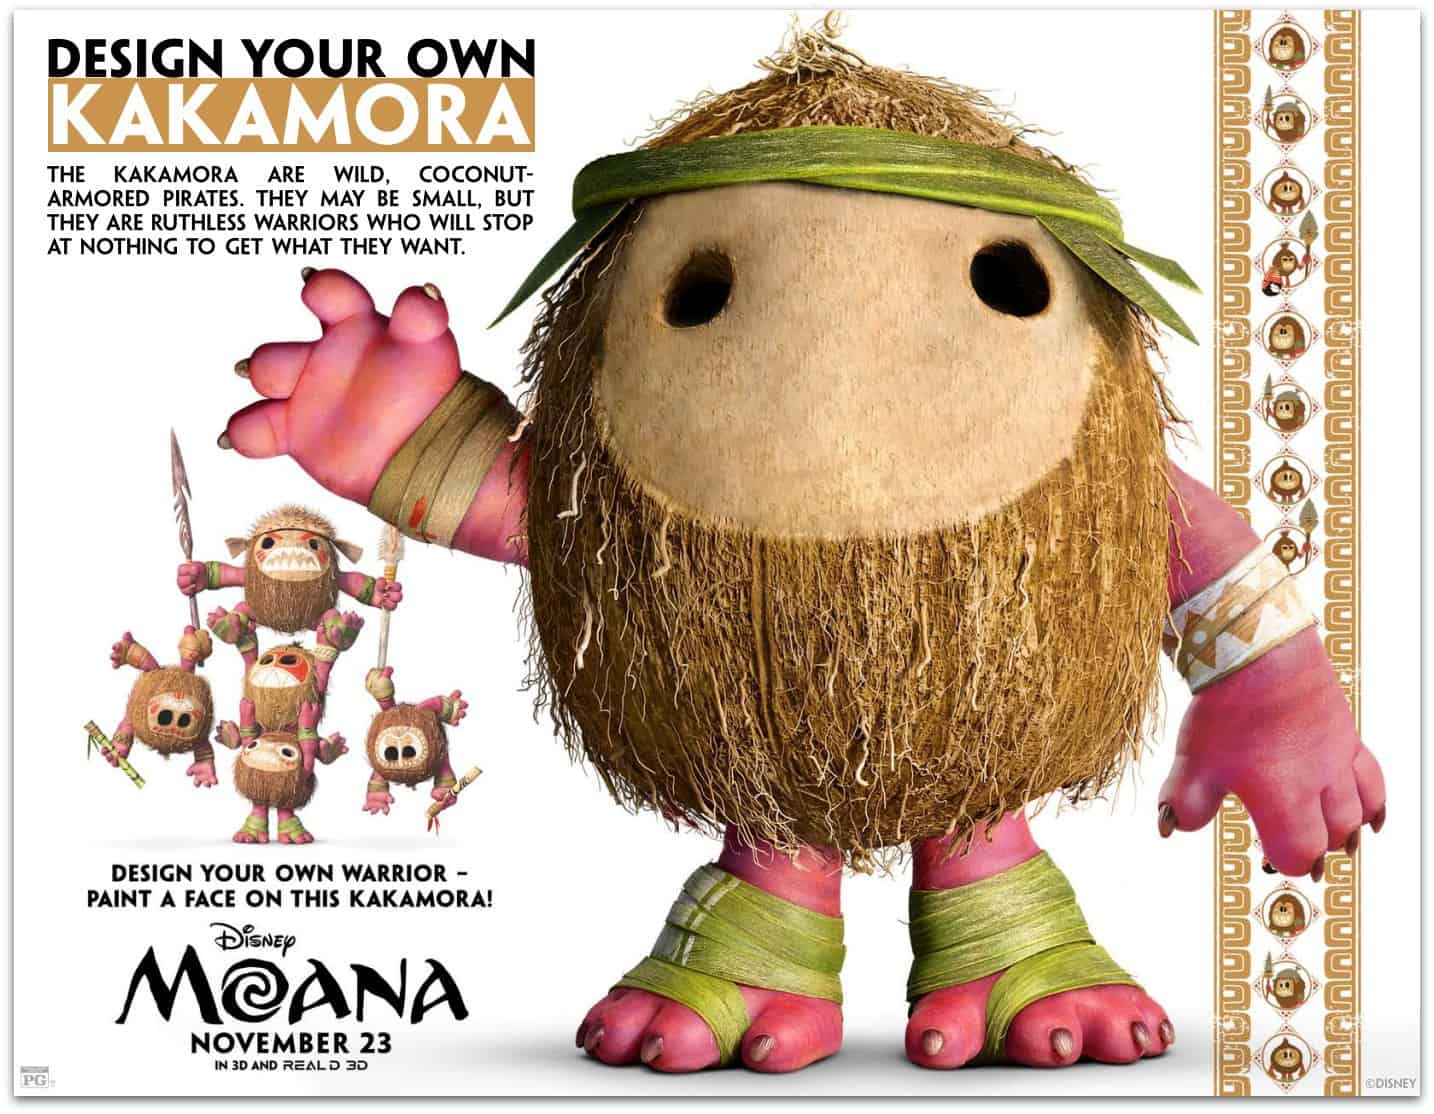 Epic 30 Moana Easter Eggs Fun Facts, MOANA Crafts And Activity Sheets